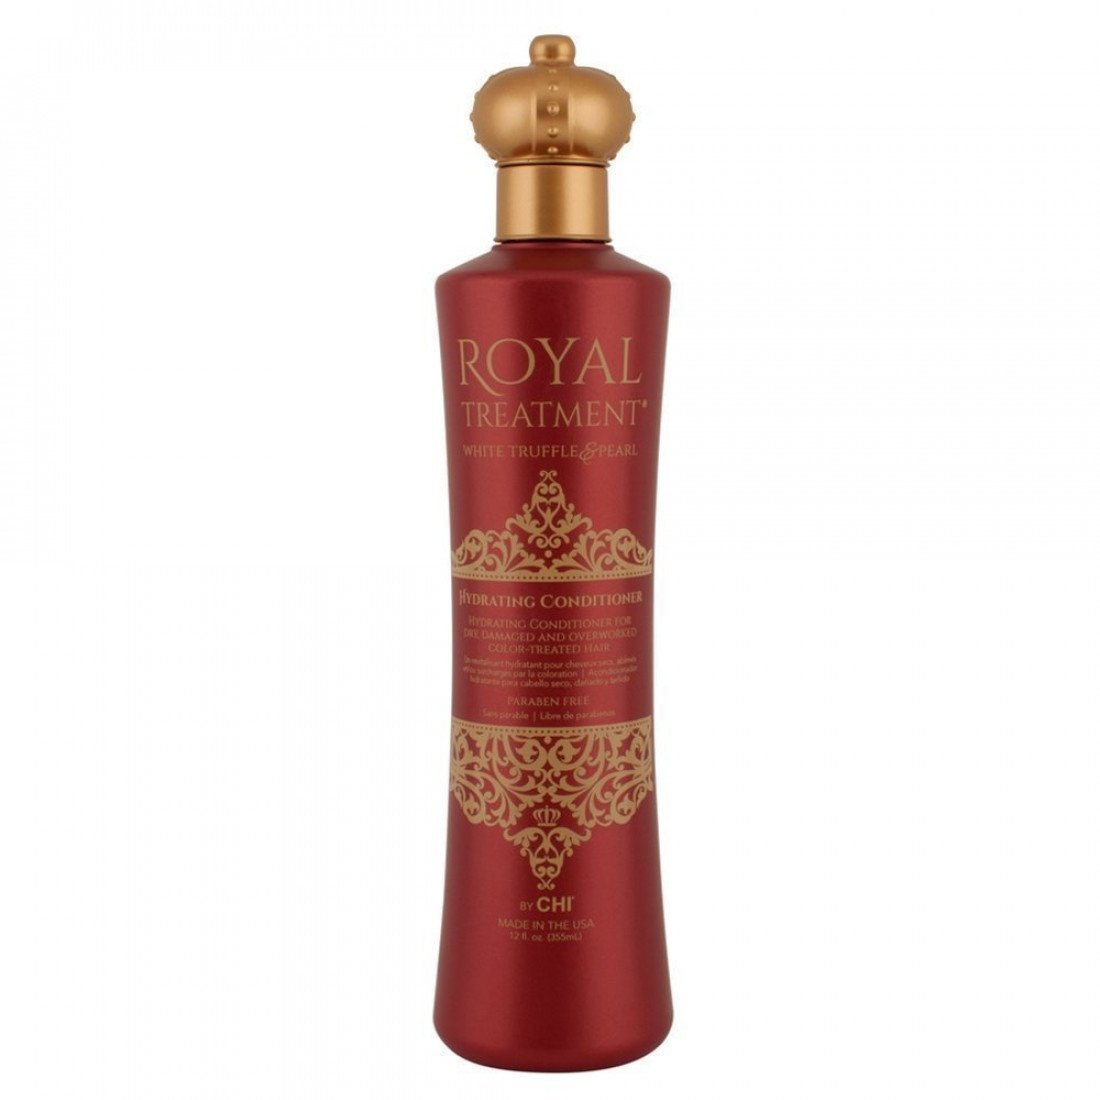 chi_royal_treatment_hydrating_conditioner_355ml